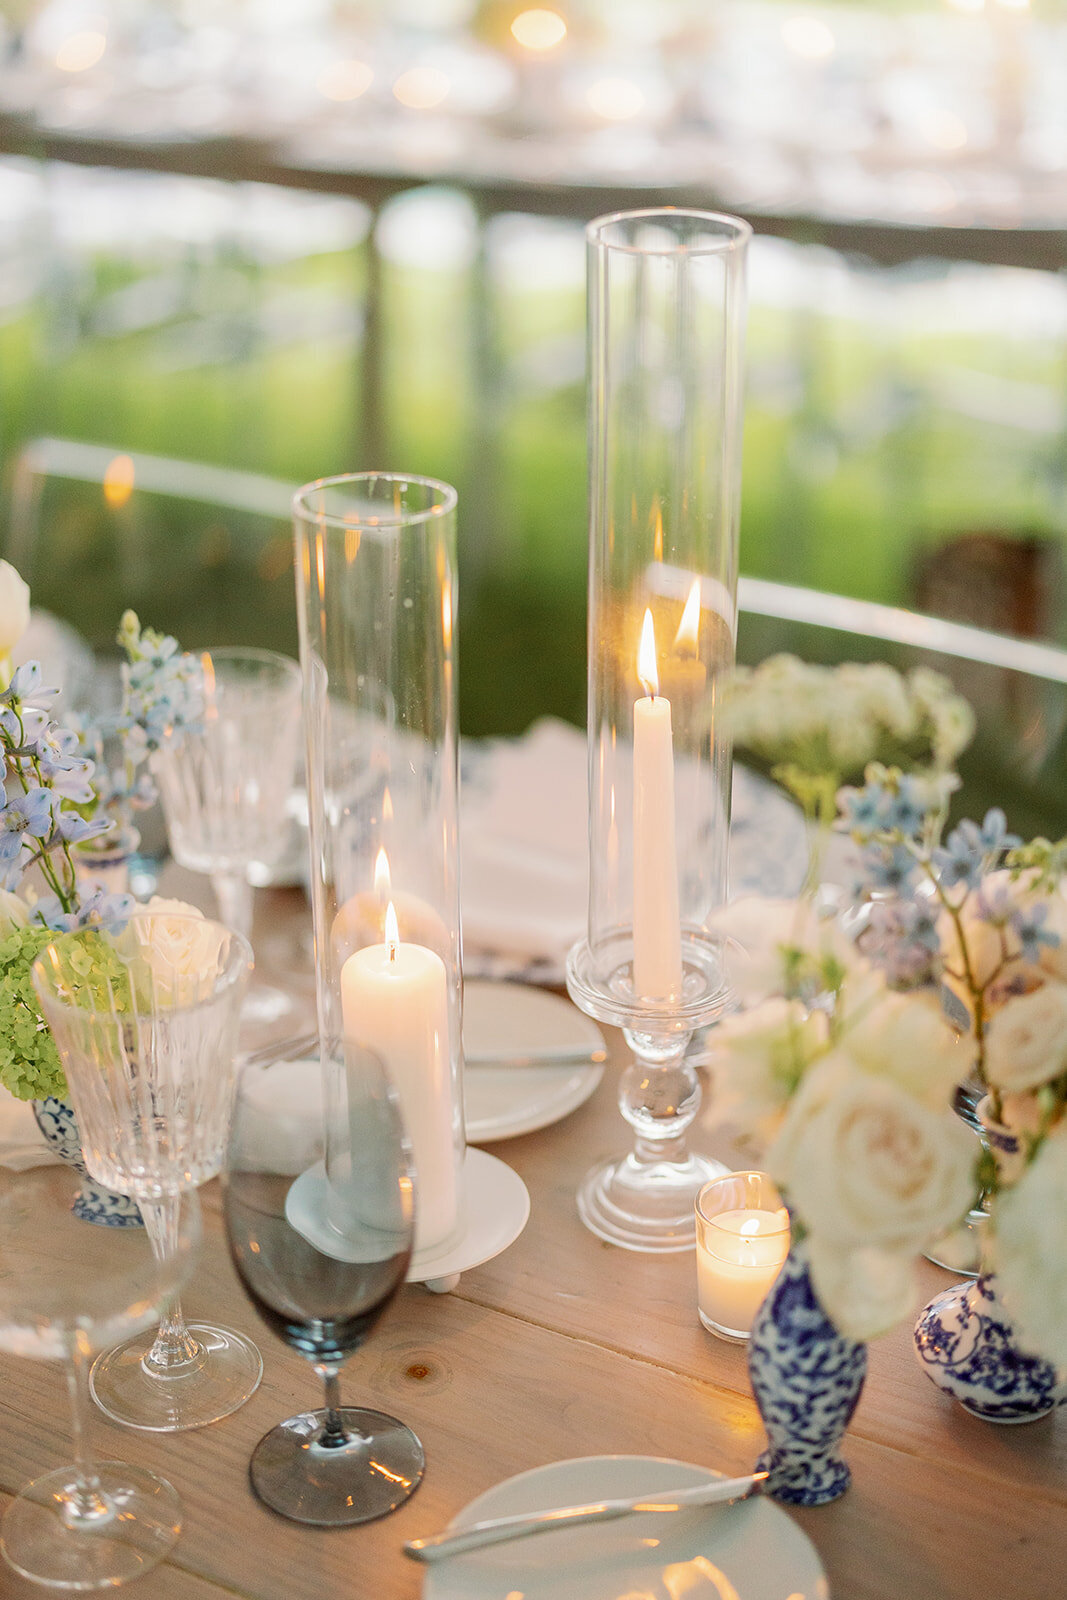 Wedding Reception Decor with Candles and Florals - Cru and Co